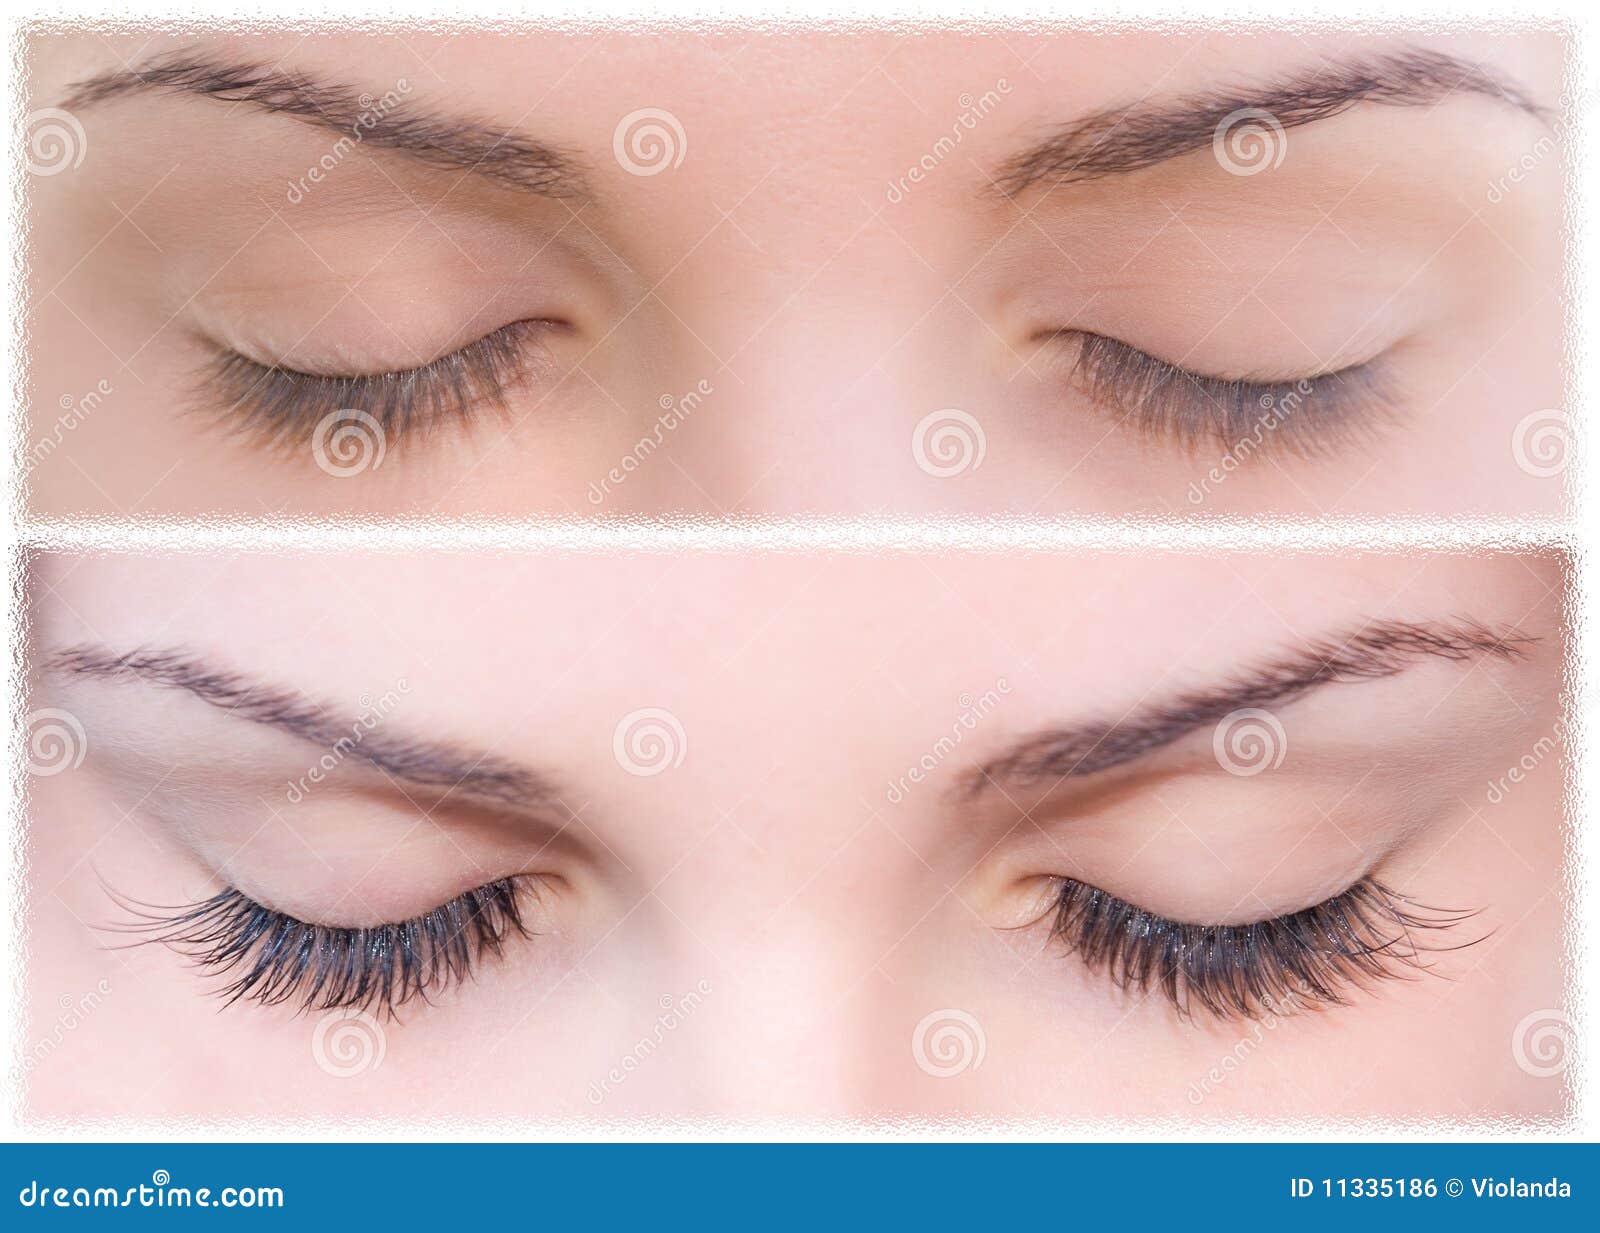 Eyelash Extensions Before and After Photos | Pretty Gossip